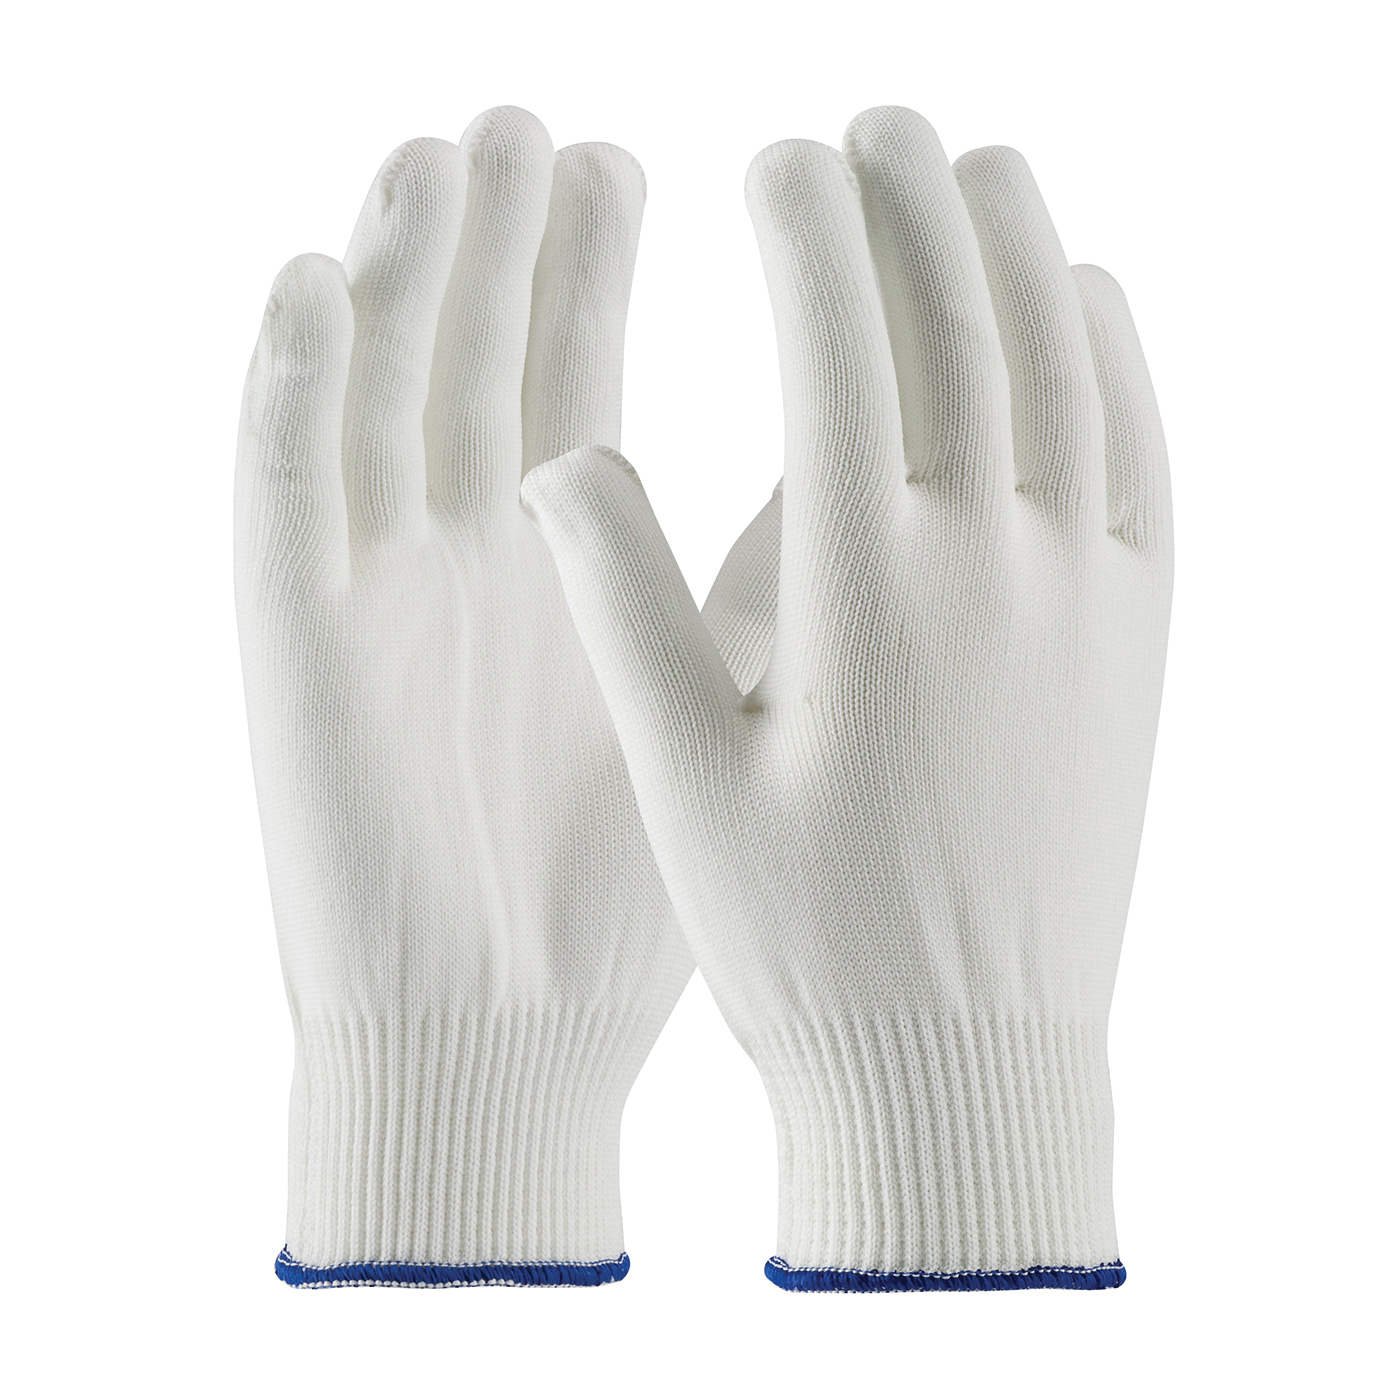 PIP® CleanTeam® 40-230M Lightweight General Purpose Gloves, Clean Environment, M, Polyester Palm, 13 ga Polyester, White, Knit Wrist Cuff, Uncoated Coating, Resists: Abrasion and Cut, Polyester Lining, Seamless Knit